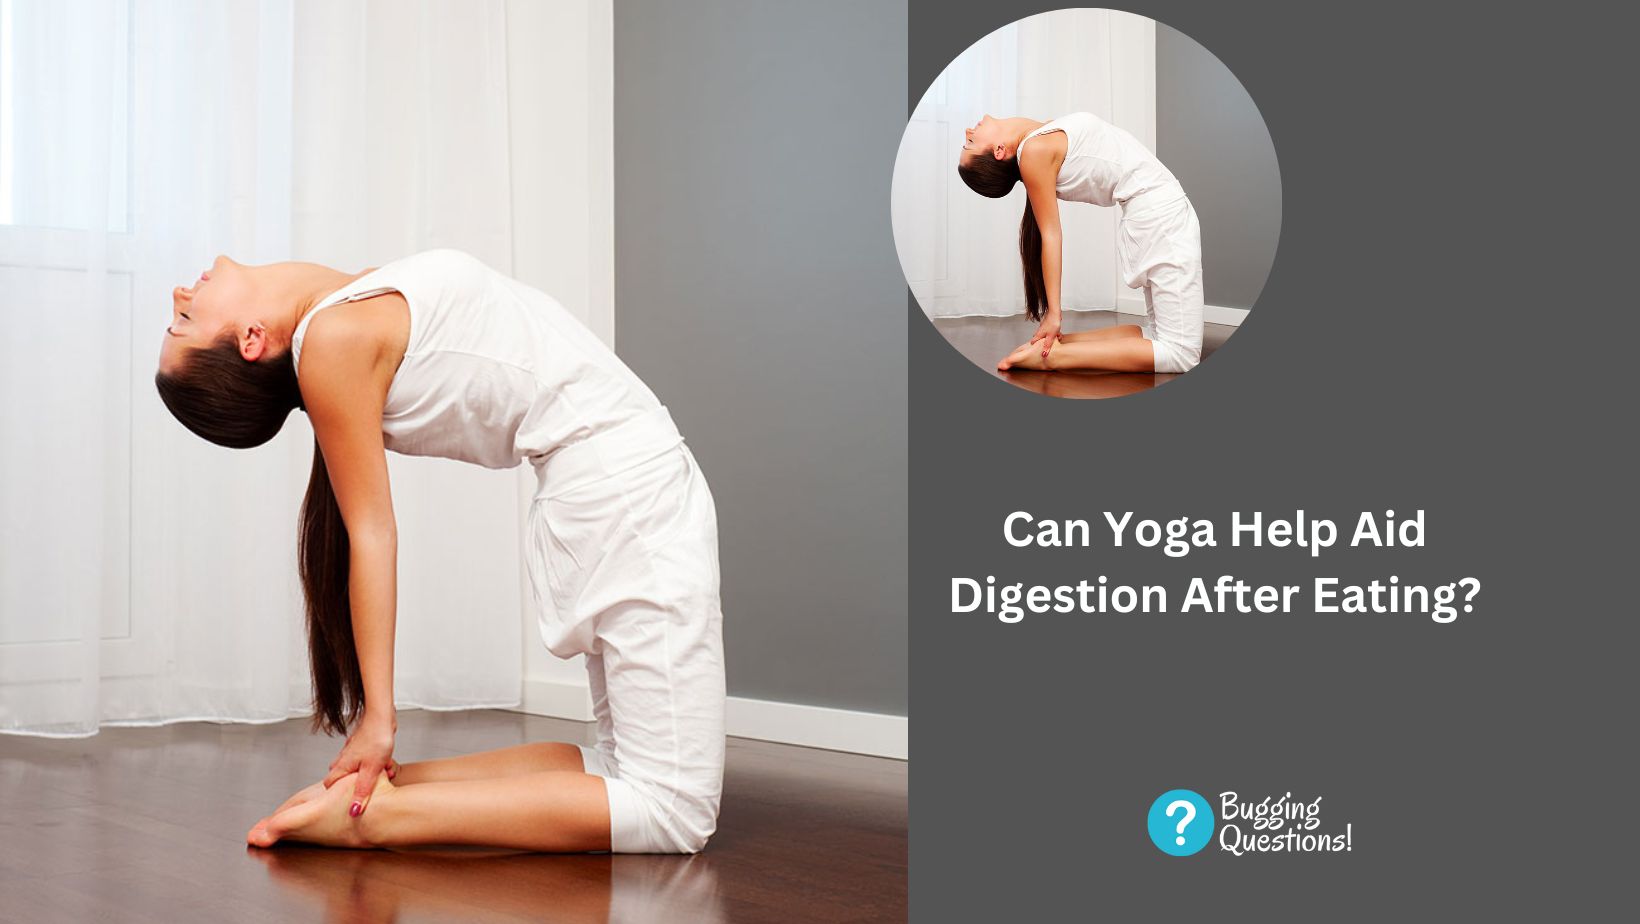 Can Yoga Help Aid Digestion After Eating?